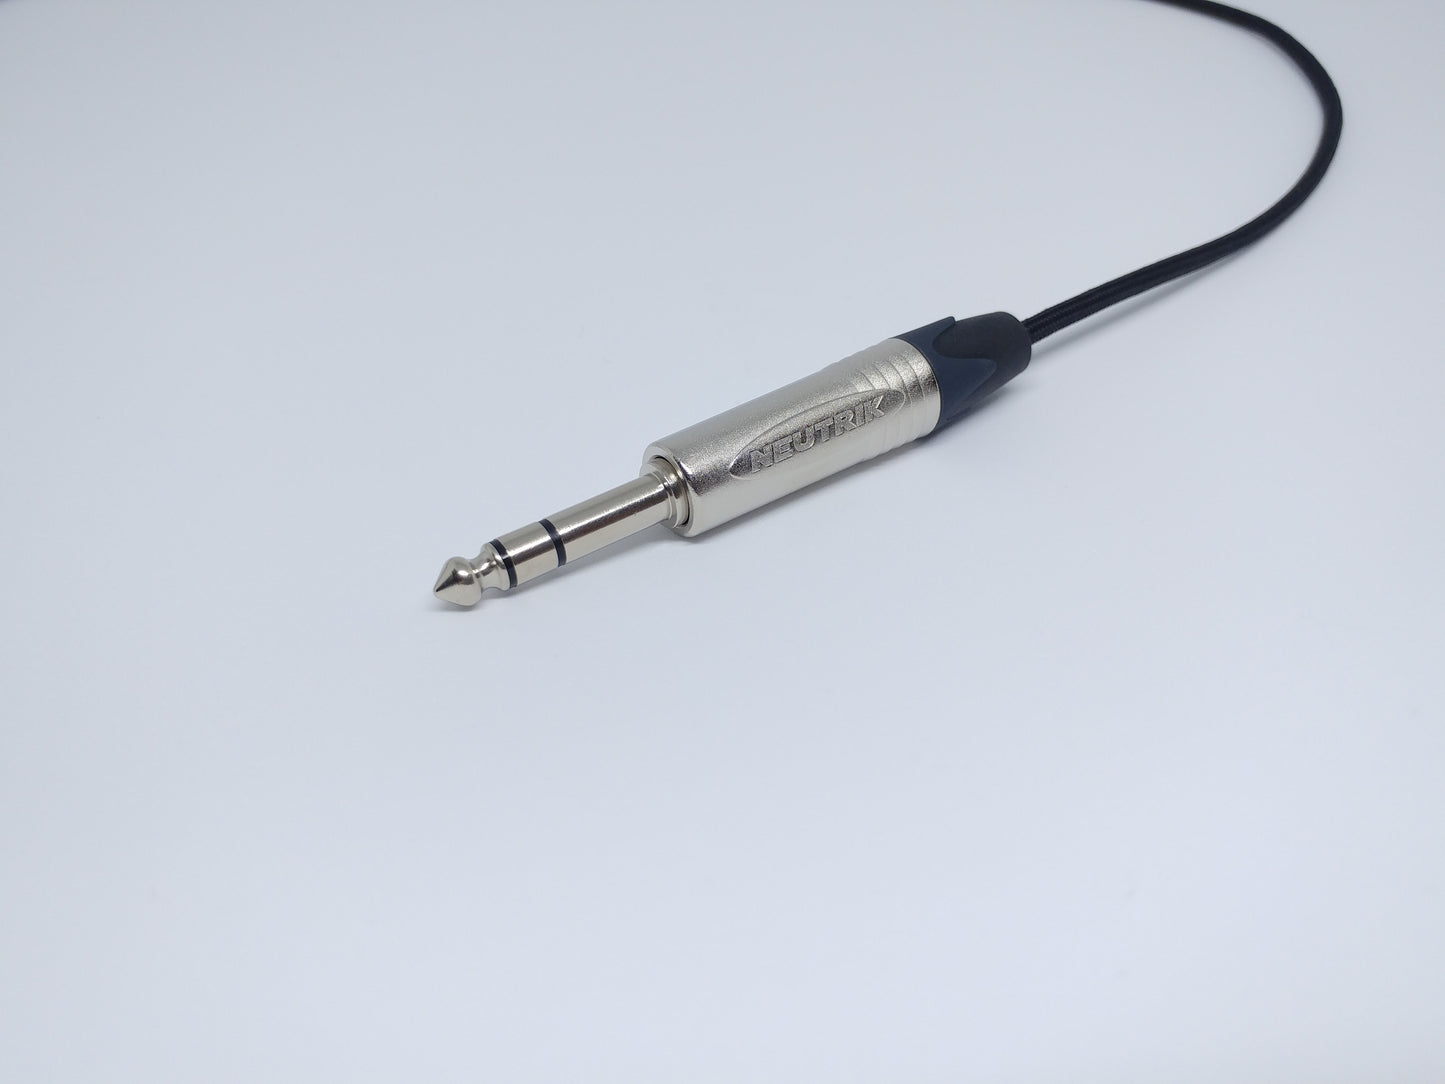 [FREE] Dual 3.5mm Headphone Cable Replacement